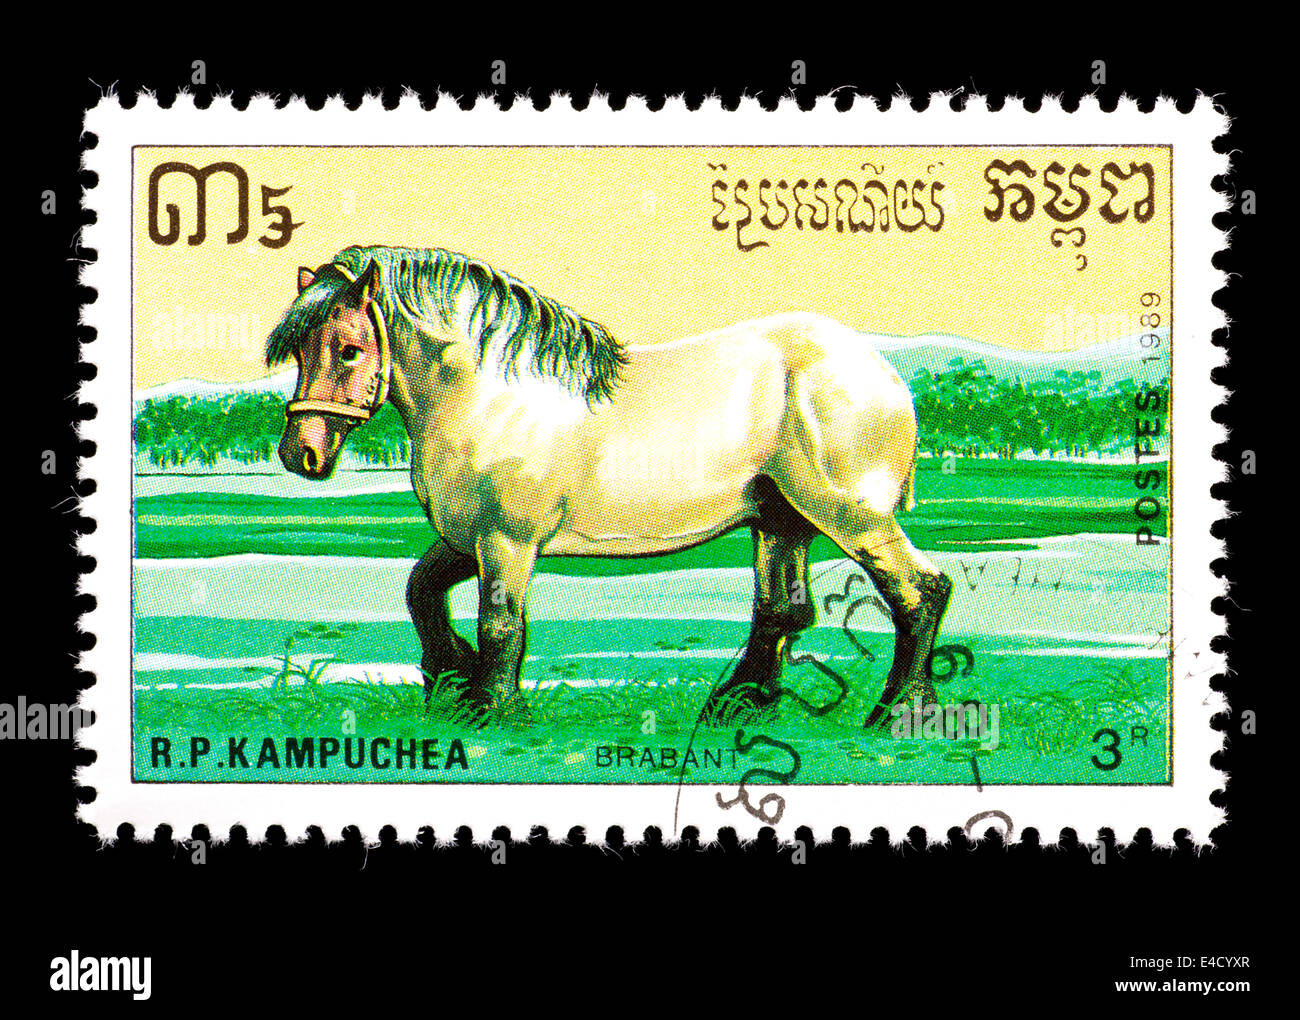 Postage stamp from Cambodia (Kampuchea) depicting a Brabant or Belgian draft horse. Stock Photo